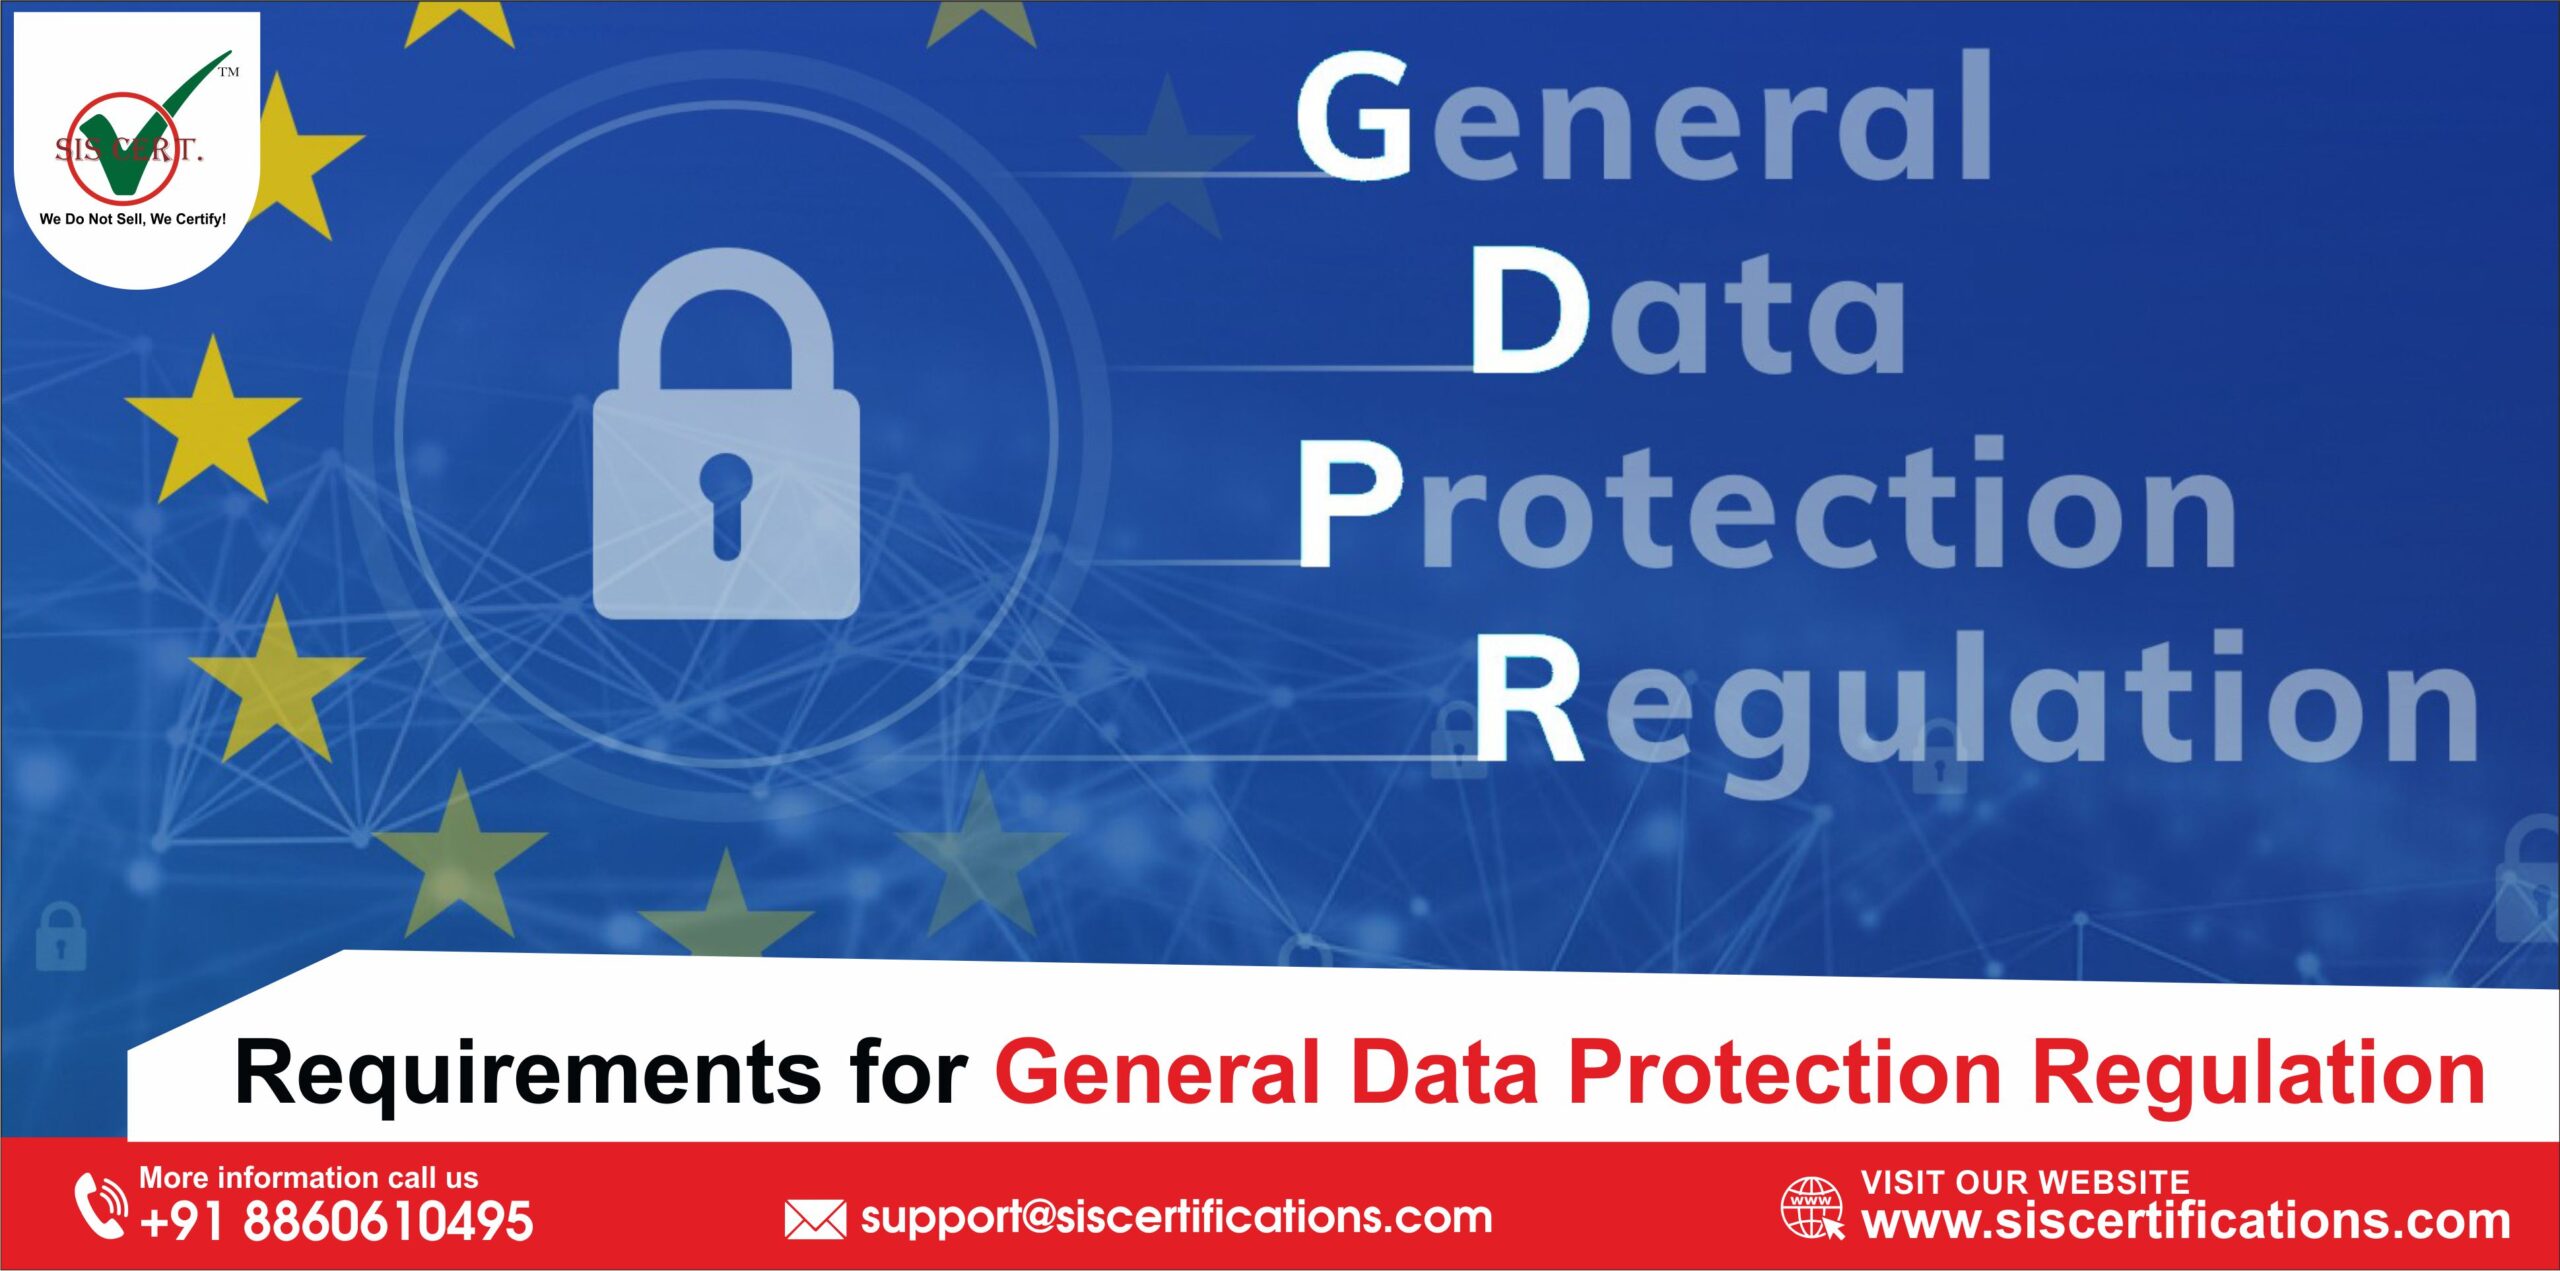 The General Data Protection Regulation (GDPR) outlines the requirements for an organization to ensure information security. It provides a set of rules and regulations for organizations that are related to data collecting and processing. It requires an organization to conduct an incident management plan and identify risks related to data processing. The cost of the General Data Protection Regulation (GDPR) varies from organization to organization depending on its size, number of employees, number of branches and the certification body selected by the organization.